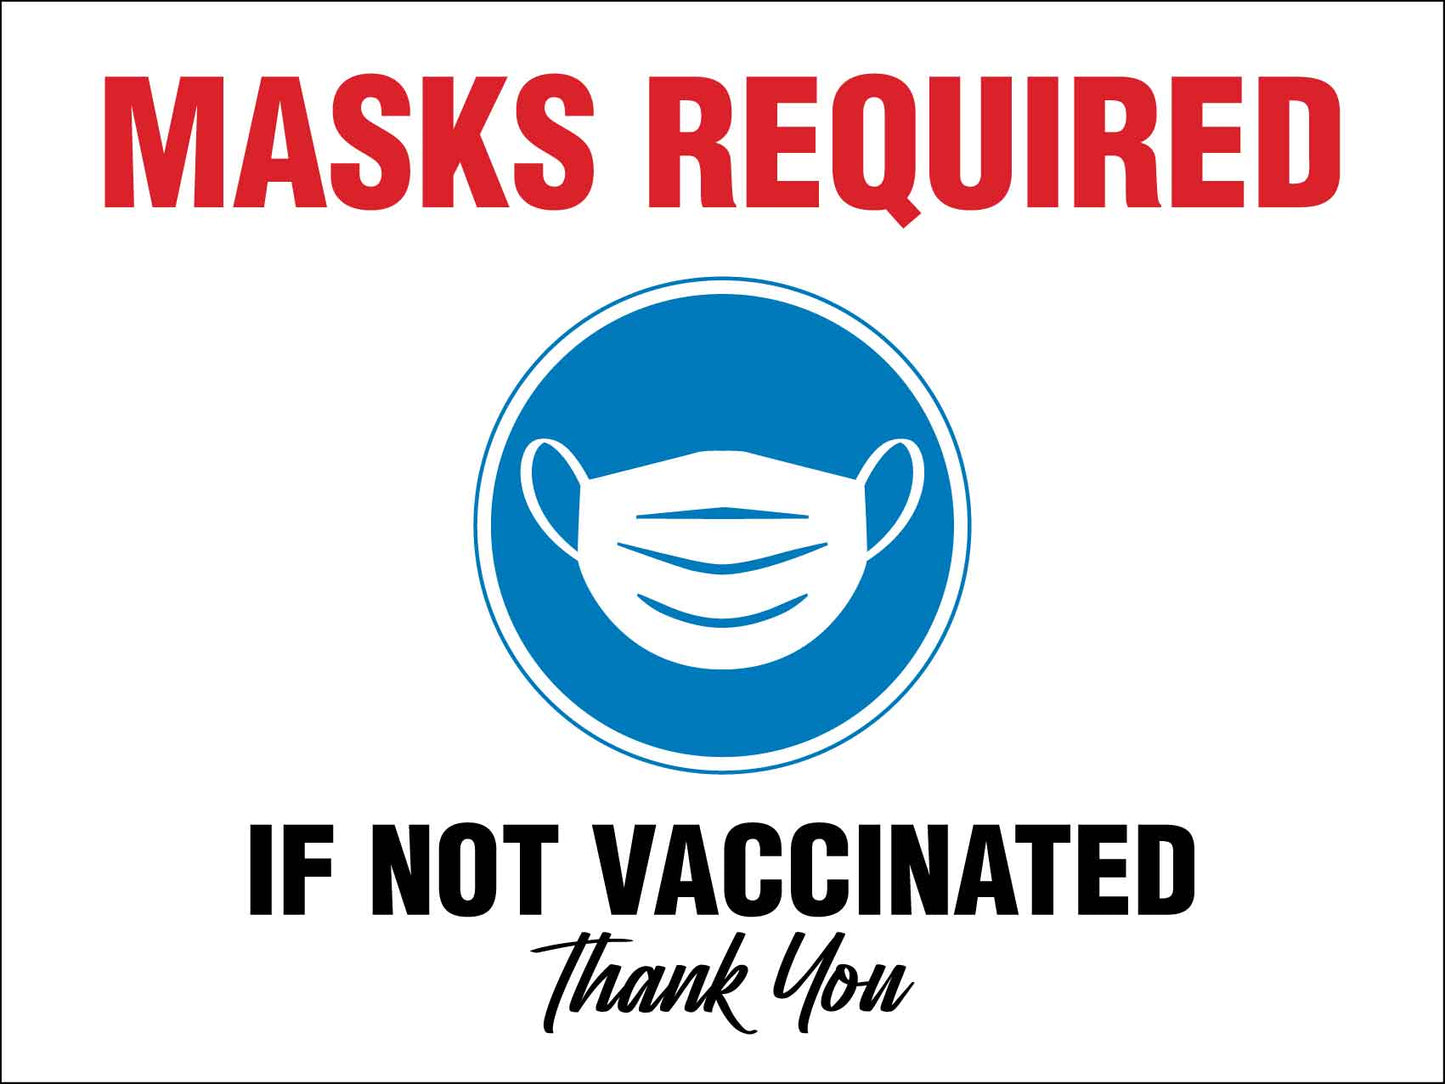 Masks Required If Not Vaccinated Thank You Sign